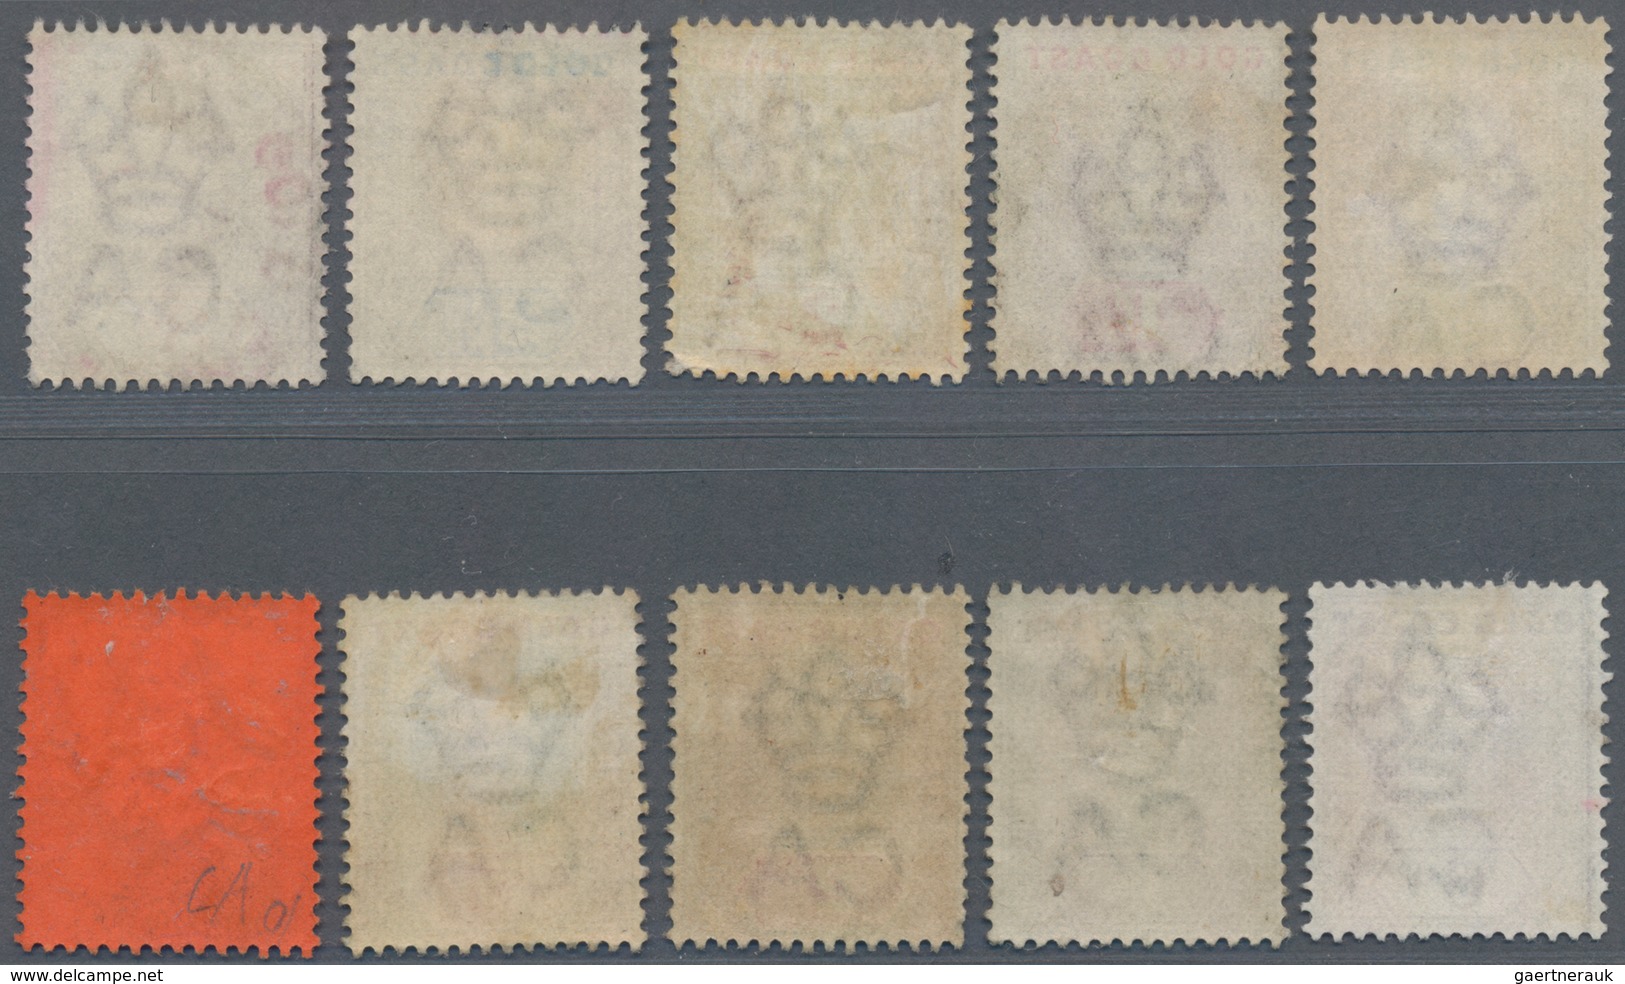 Goldküste: 1902 KEVII. Set Of 10 Up To 20s. Except The 10s., All Fine Used. (SG About £400) - Goldküste (...-1957)